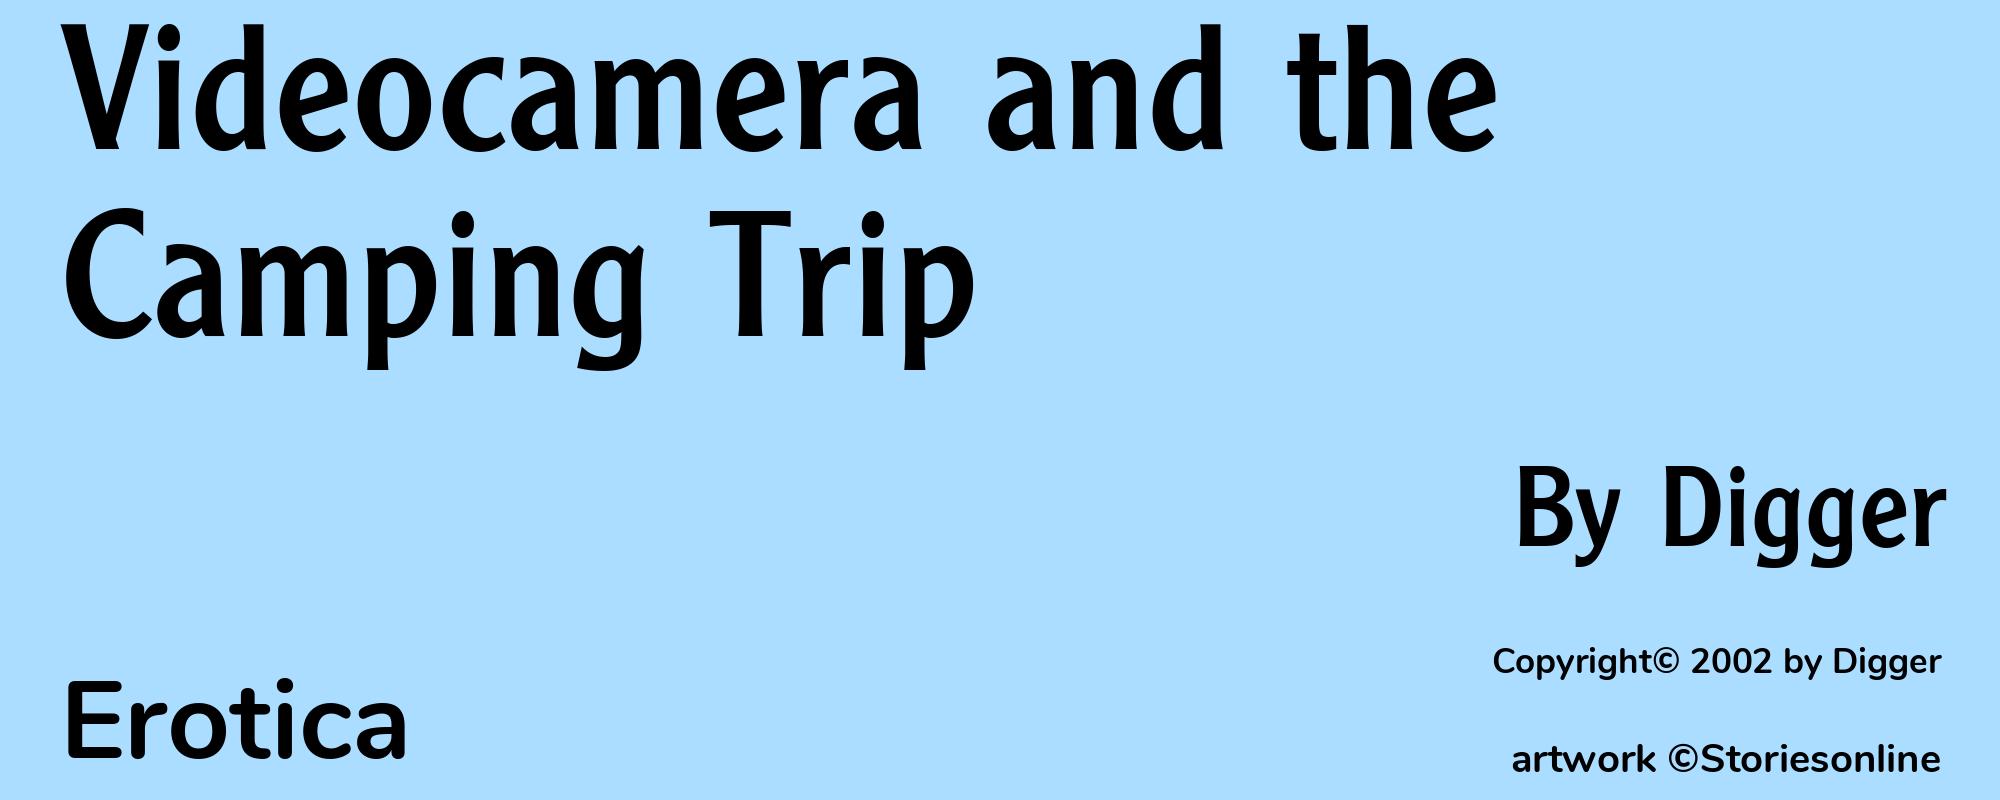 Videocamera and the Camping Trip - Cover